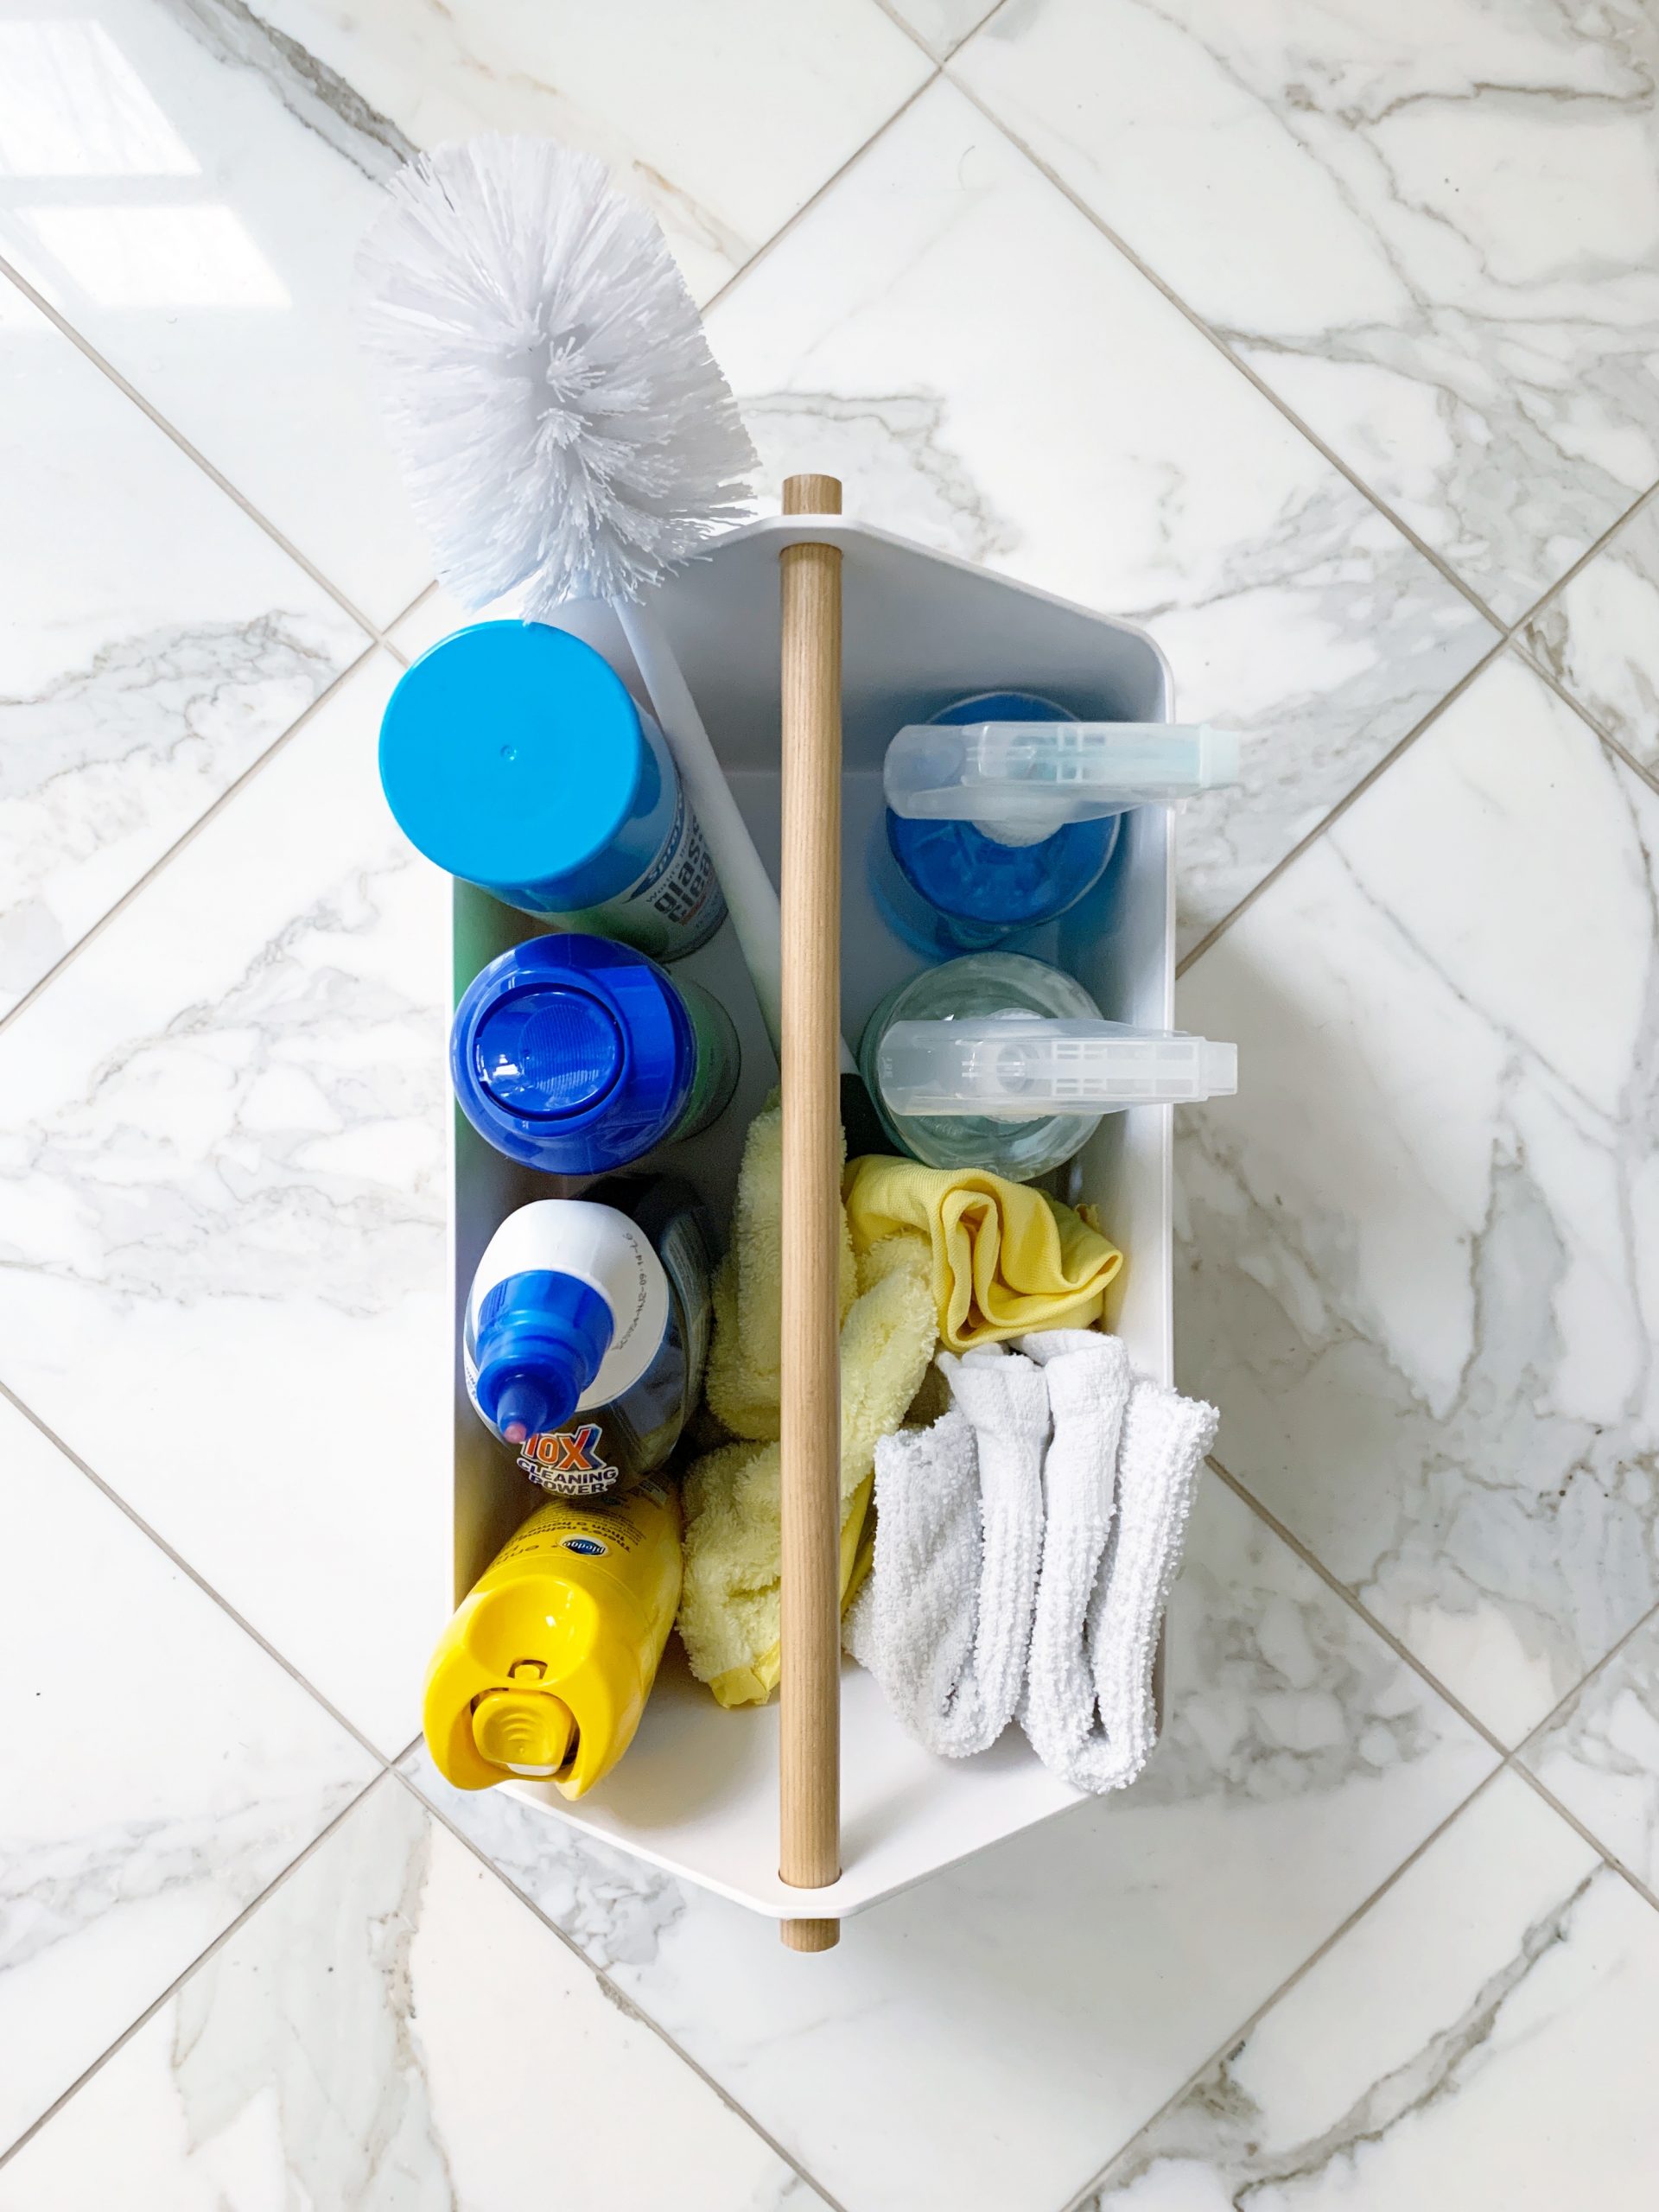 How to stock and organize a cleaning caddy